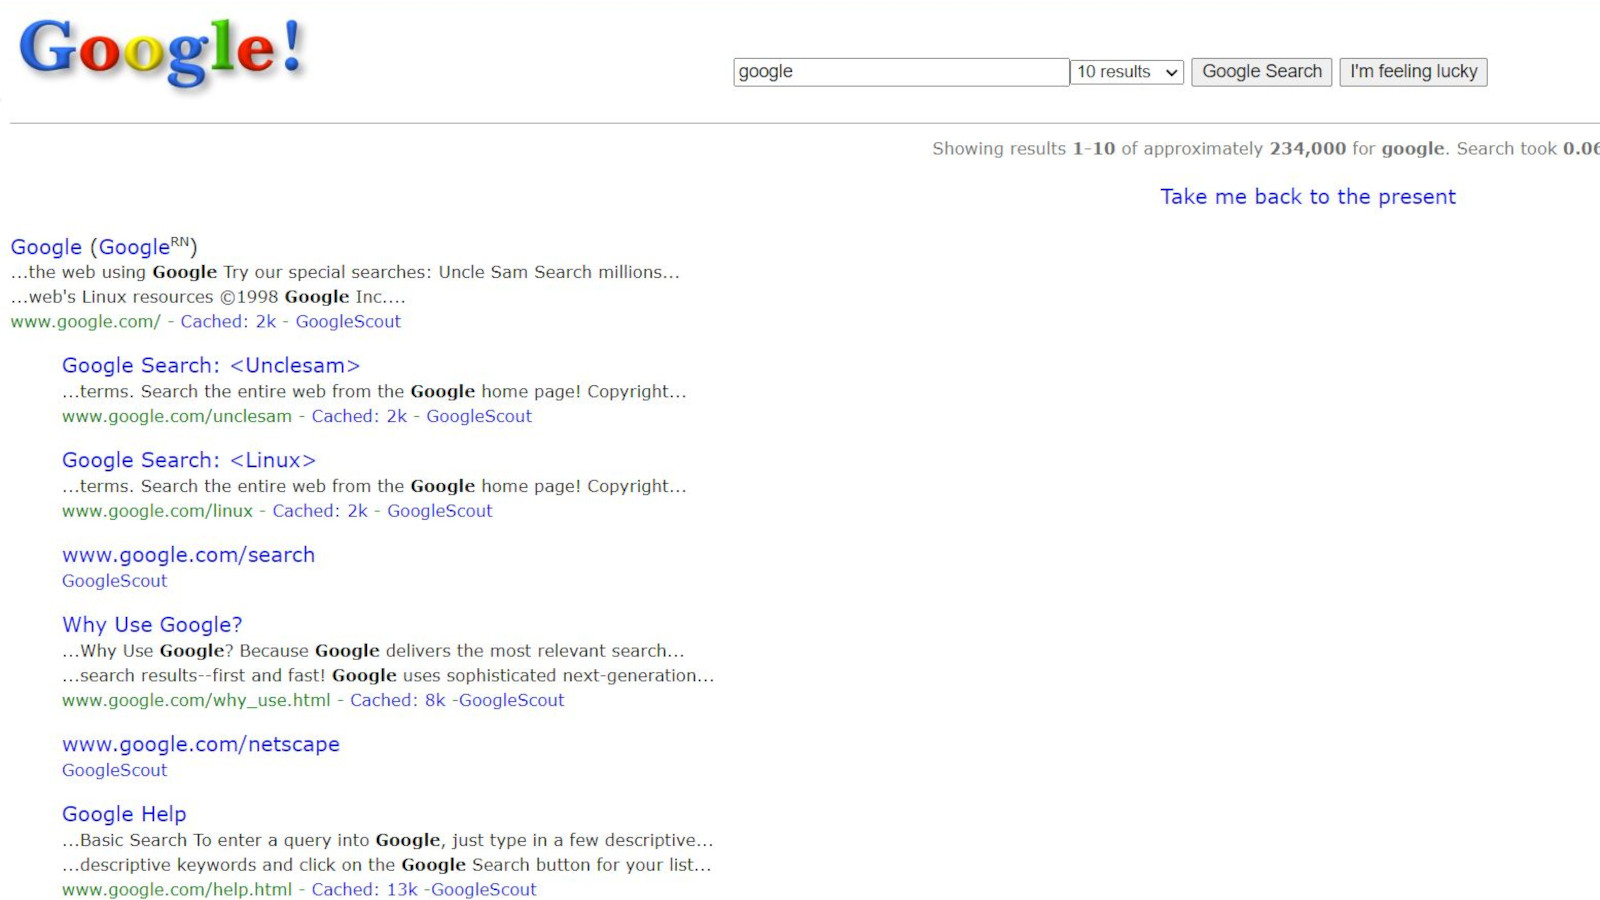 Screenshot of Google's search engine in 1998